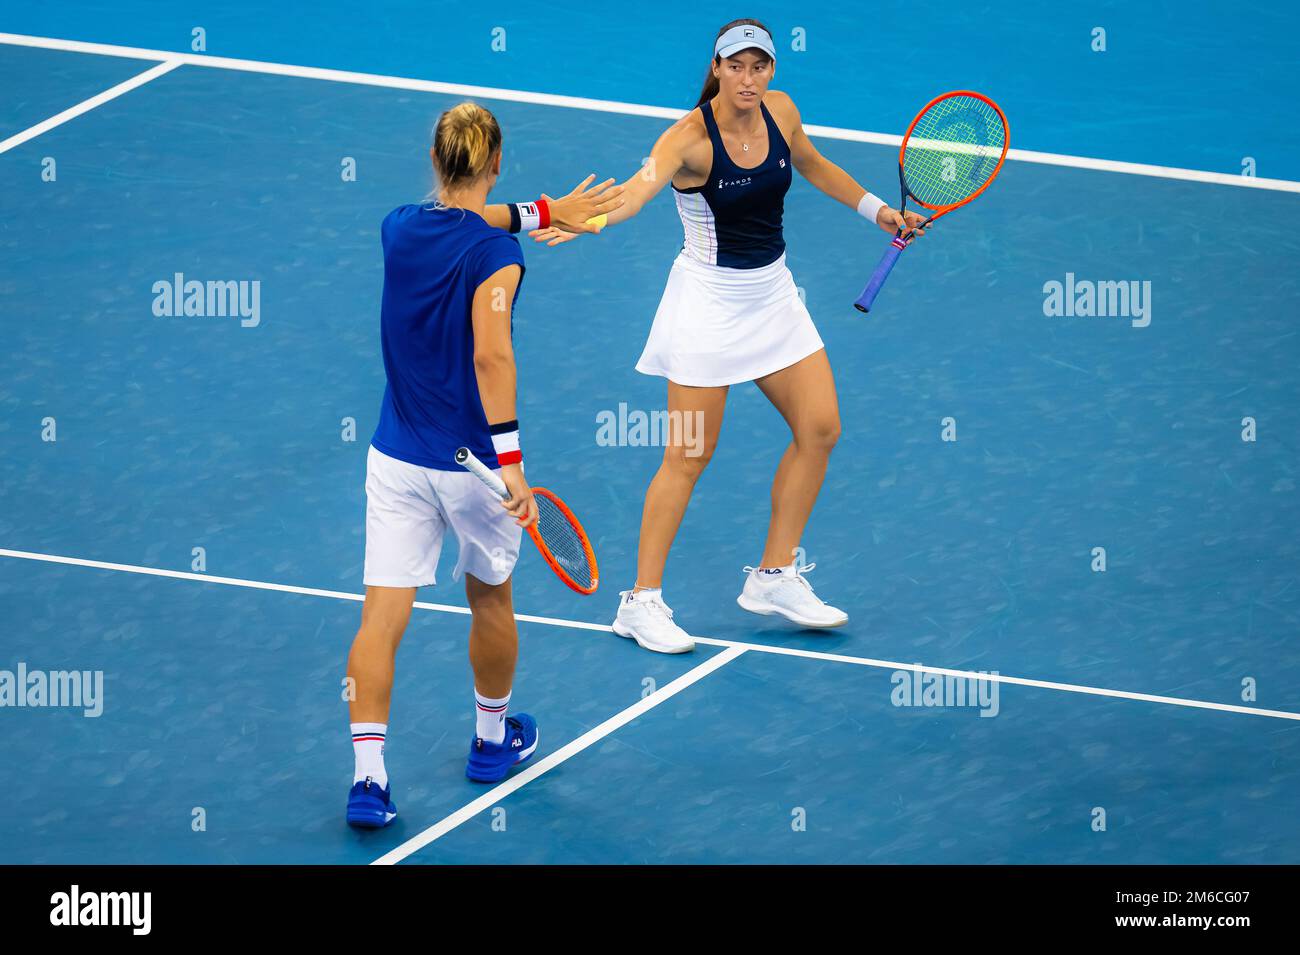 Luisa Stefani of Brazil and Rafael Matos of Brazil during their second mixed doubles match at the 2023 United Cup Brisbane tennis tournament on January 1, 2023 in Brisbane, Australia - Photo: Rob Prange/DPPI/LiveMedia Stock Photo